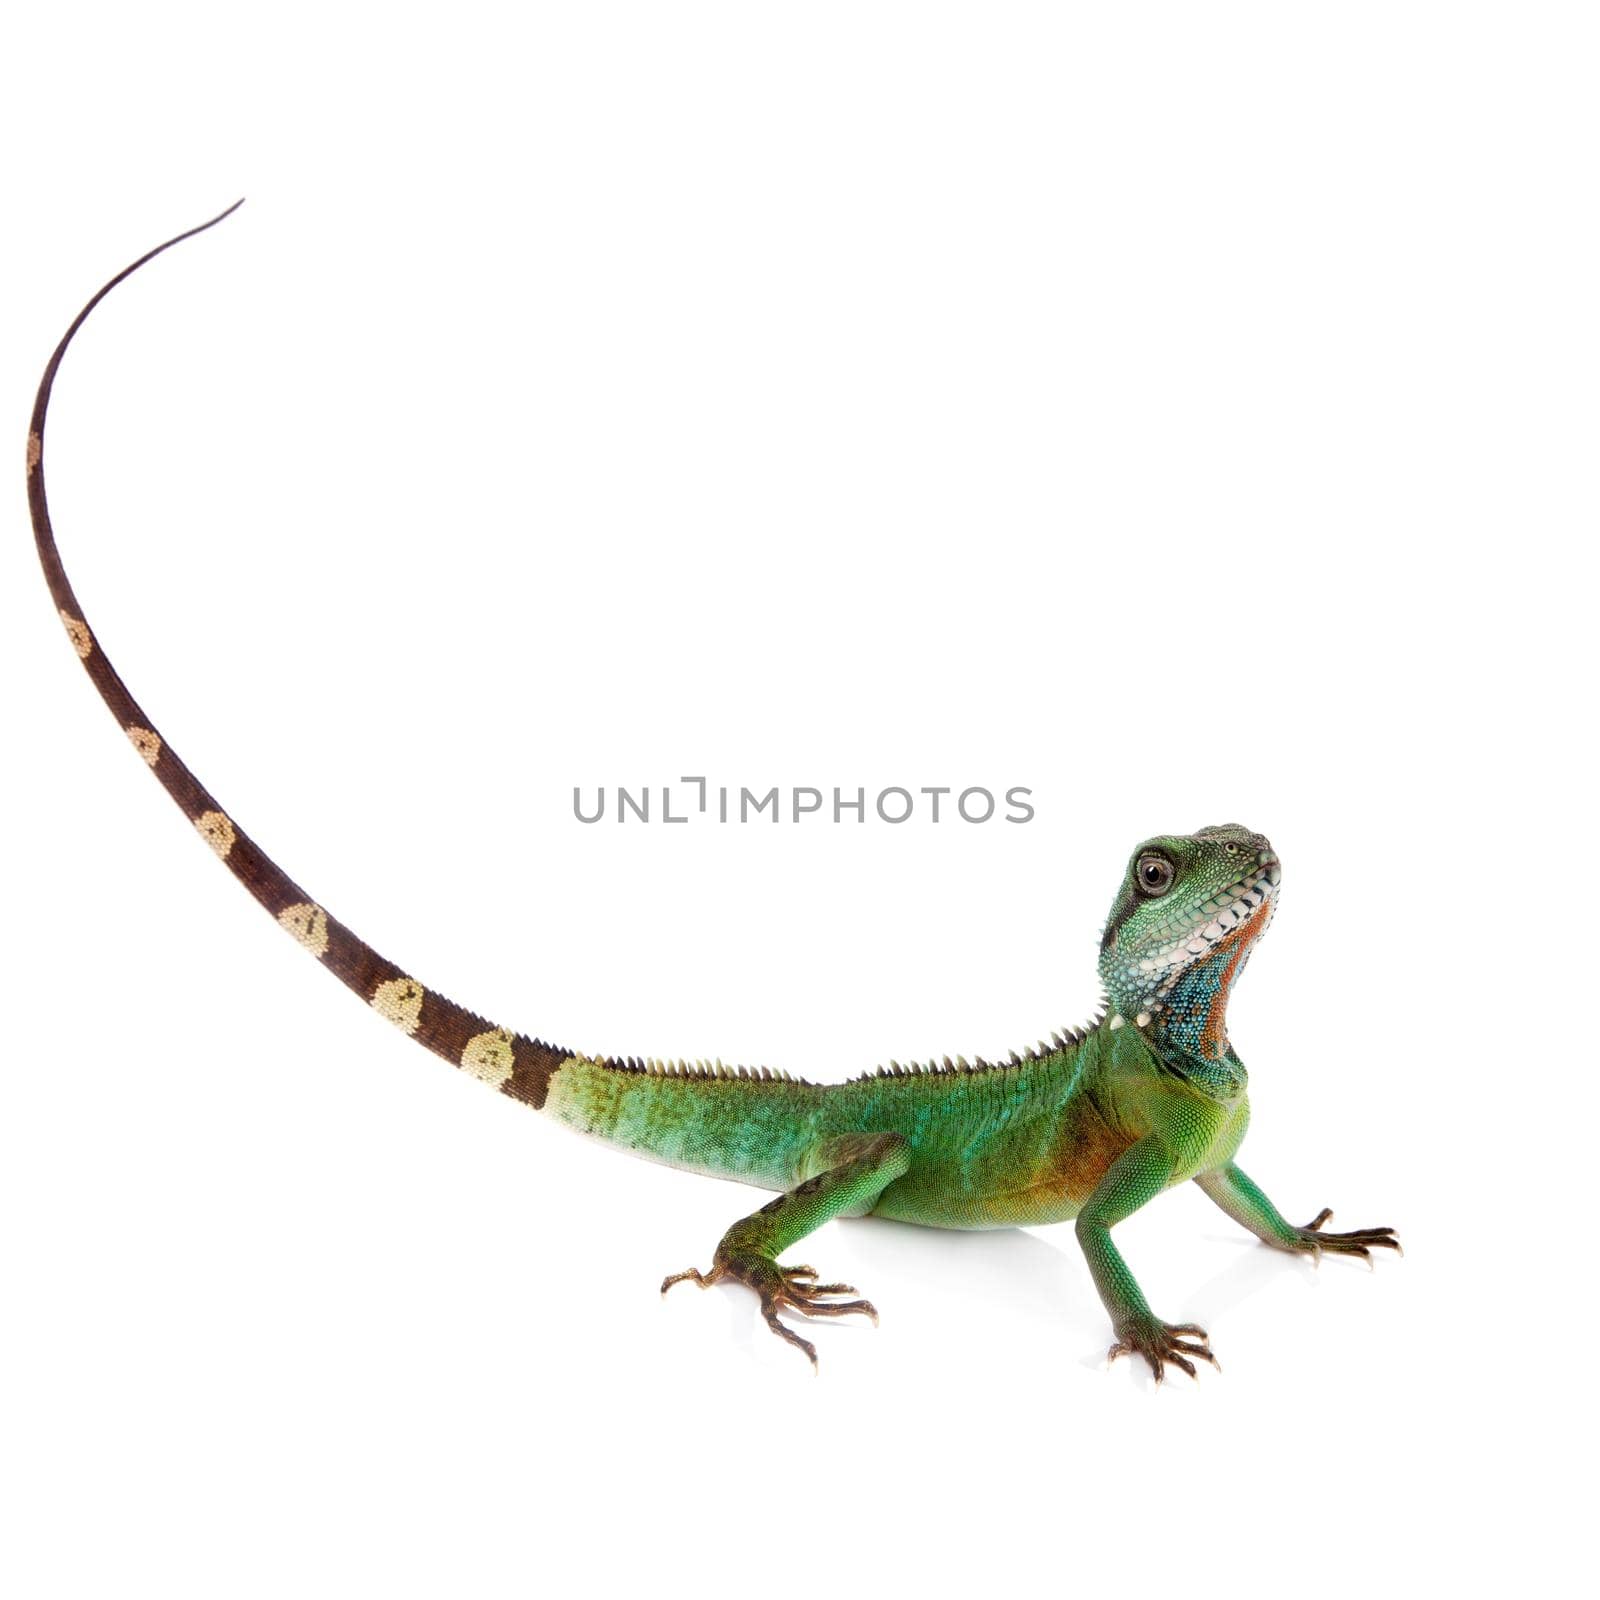 The Australian water dragon, Intellagama or Physignathus lesueurii which includes the eastern water dragon isolated on white background